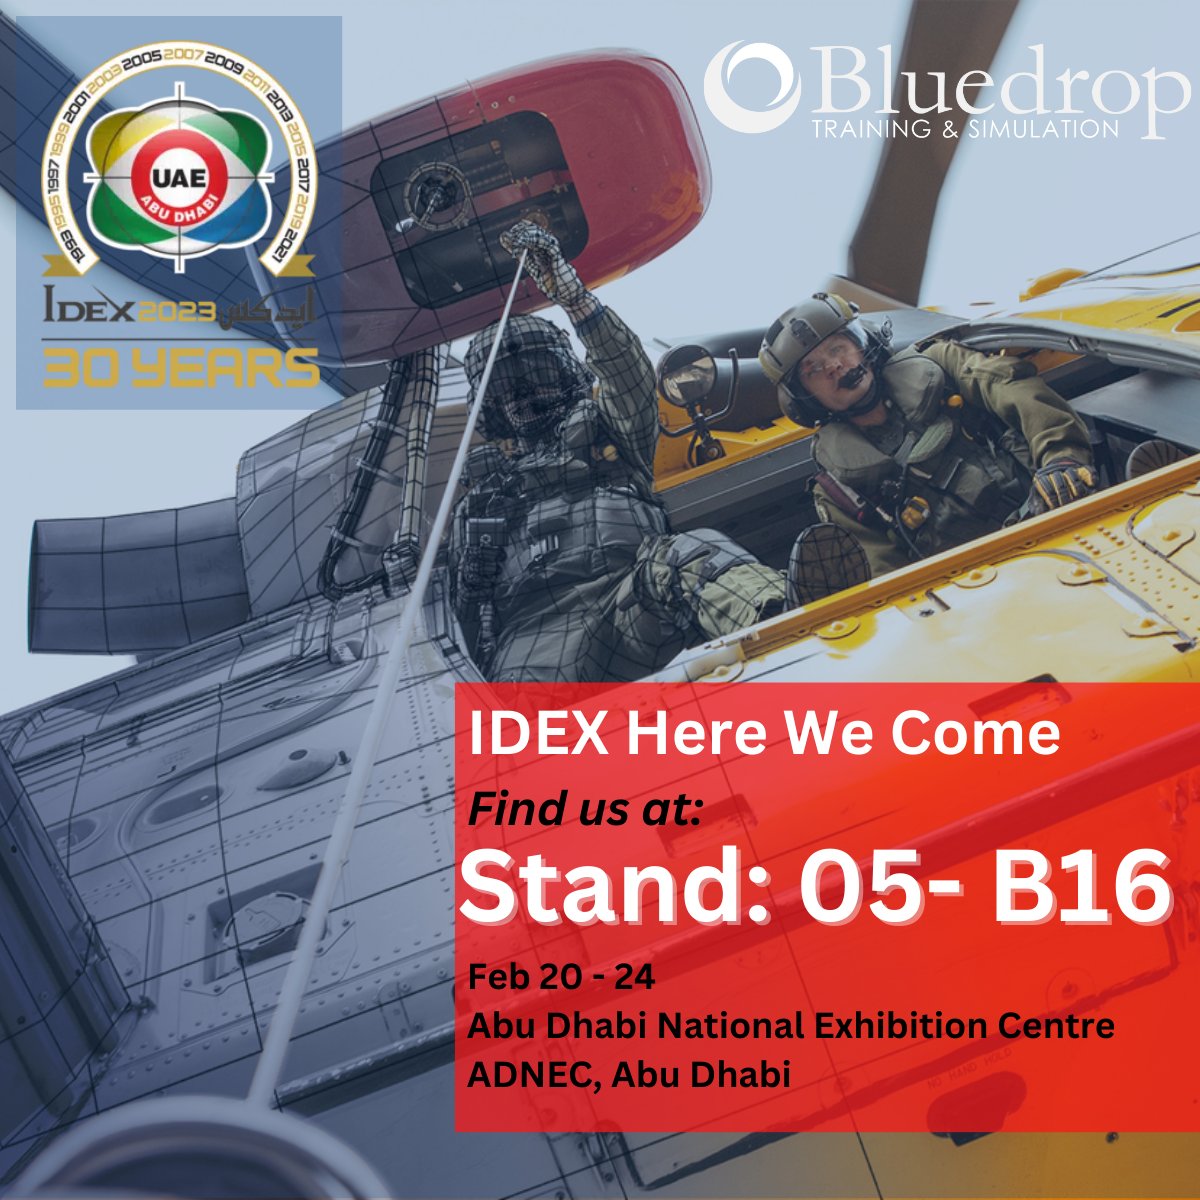 Get ready for takeoff✈ Bluedrop is heading to IDEX 2023. You can find the Bluedrop team at stand: 05-B16. Stop by to learn how Bluedrop can advance your training and learn about our new service, Simulation As A Service. See you soon!